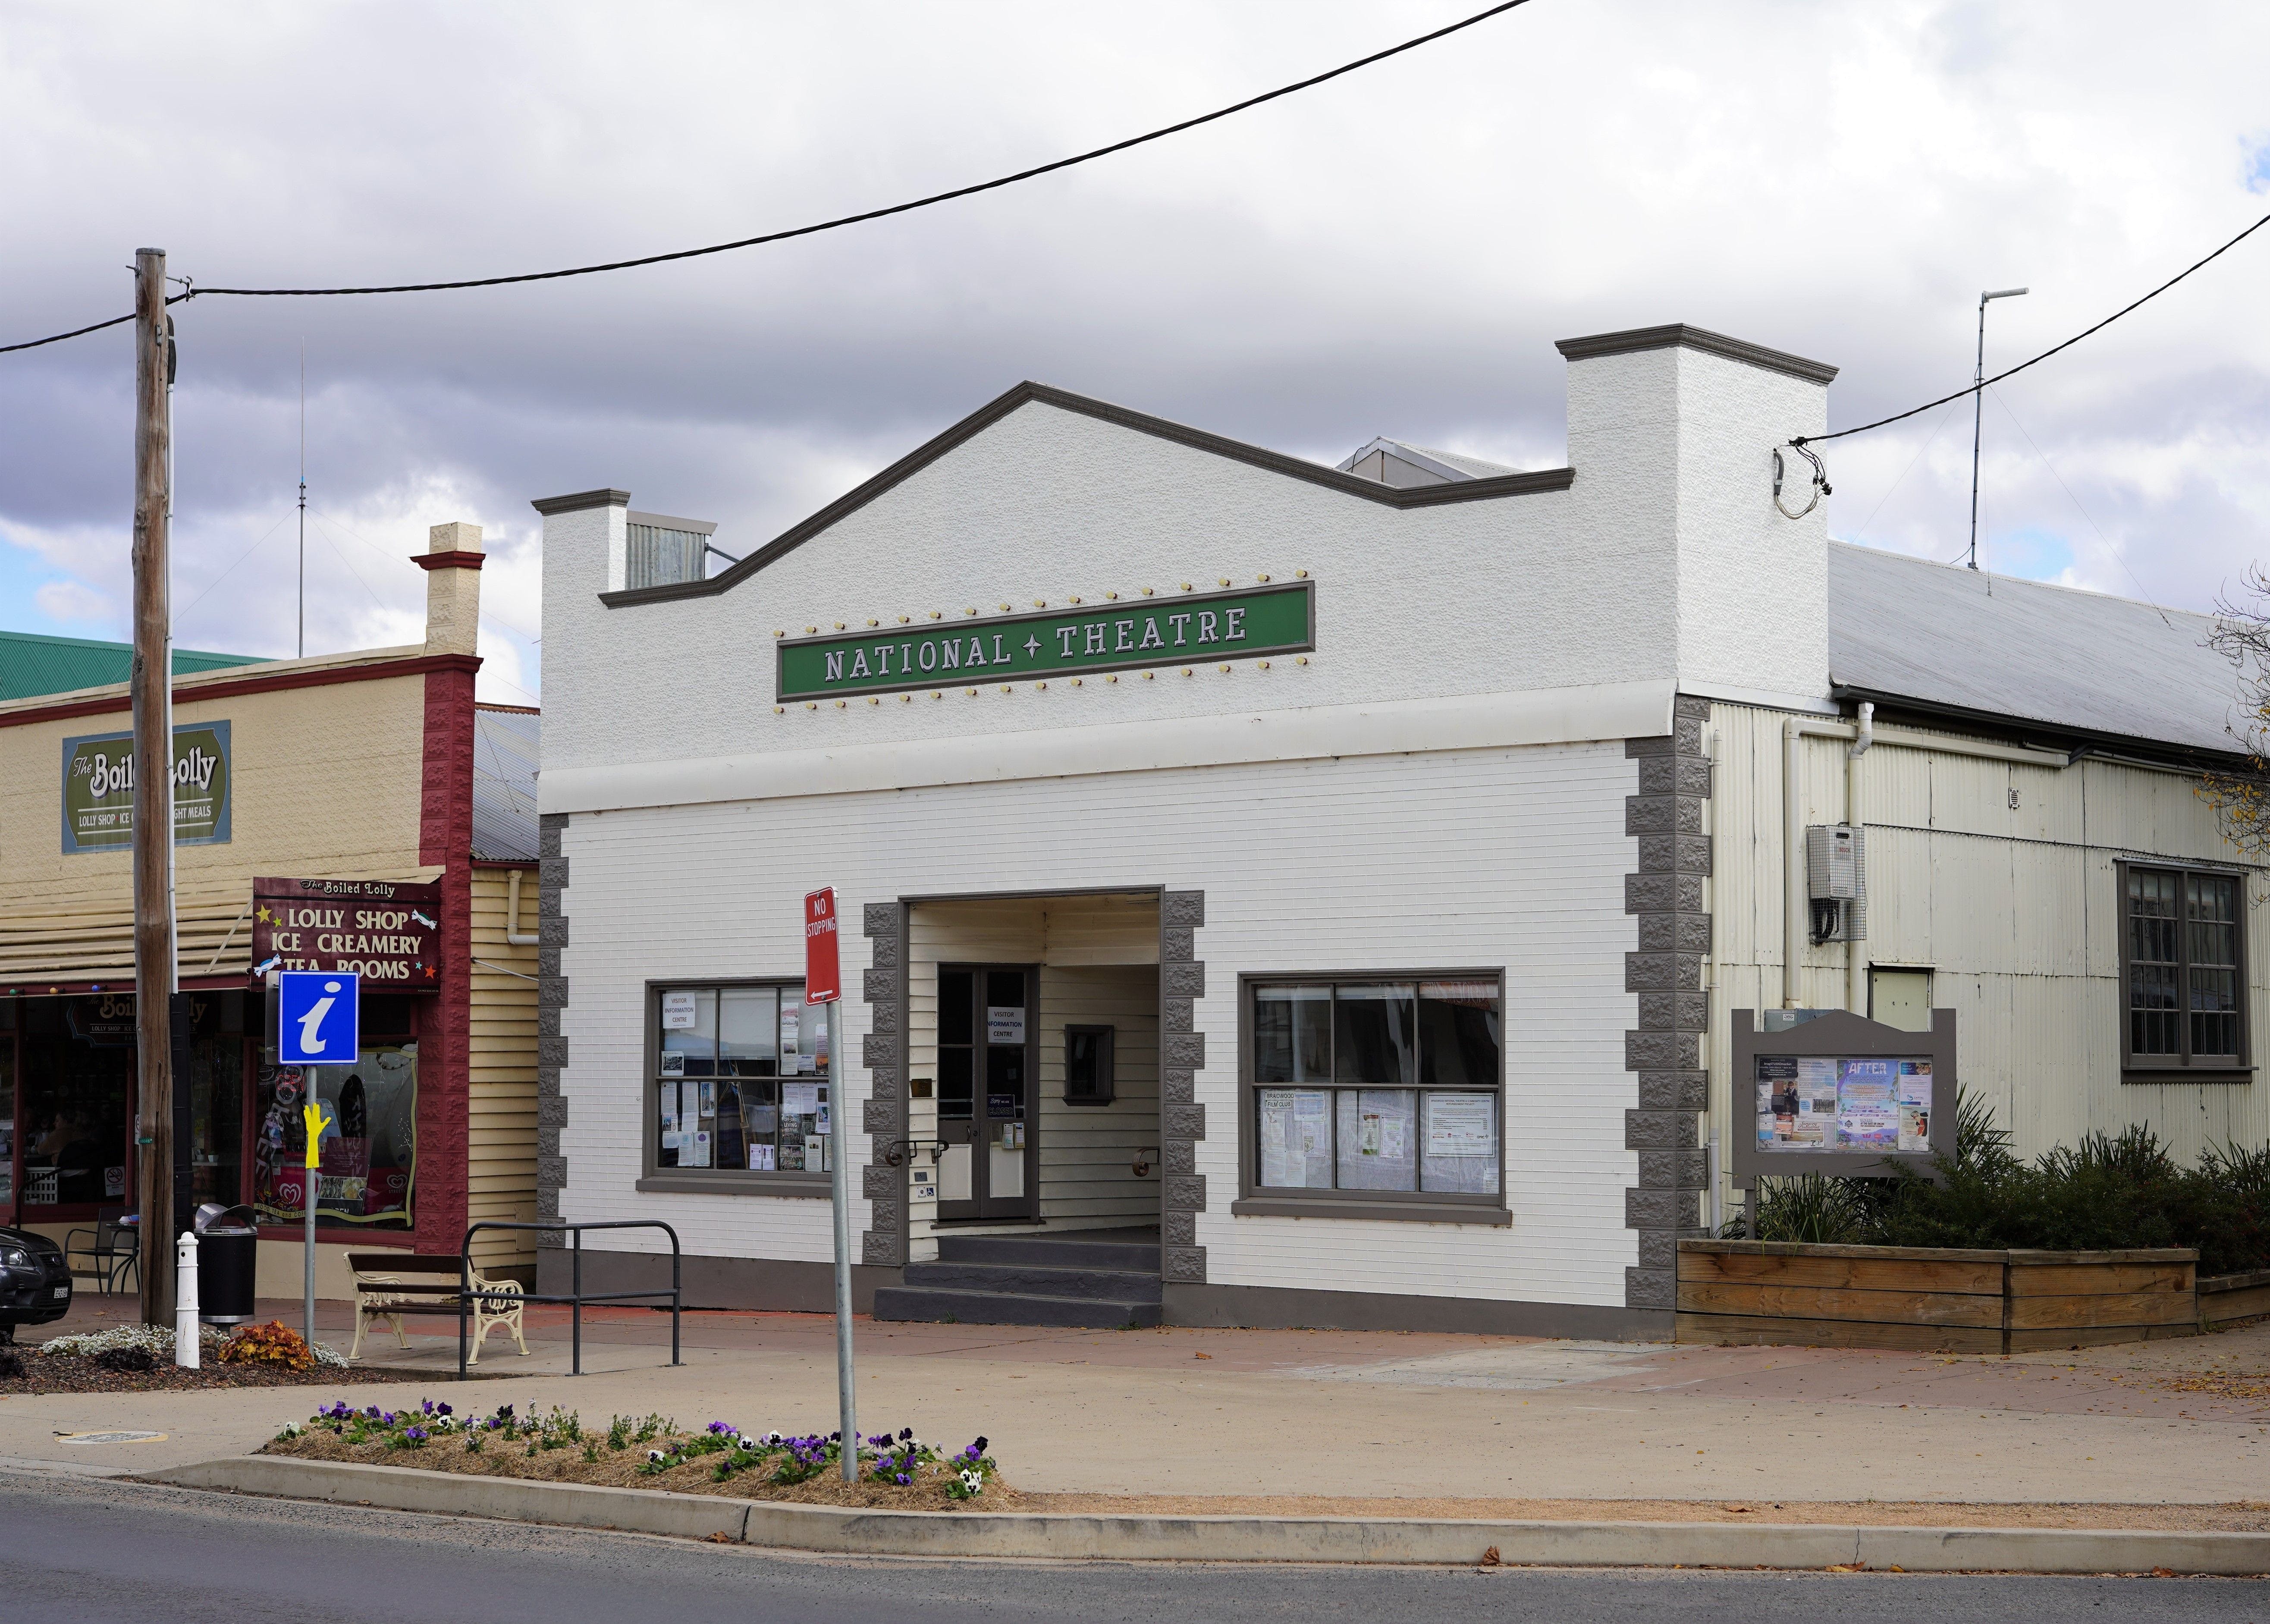 Braidwood Visitors Information Centre at the Theatre - Attractions